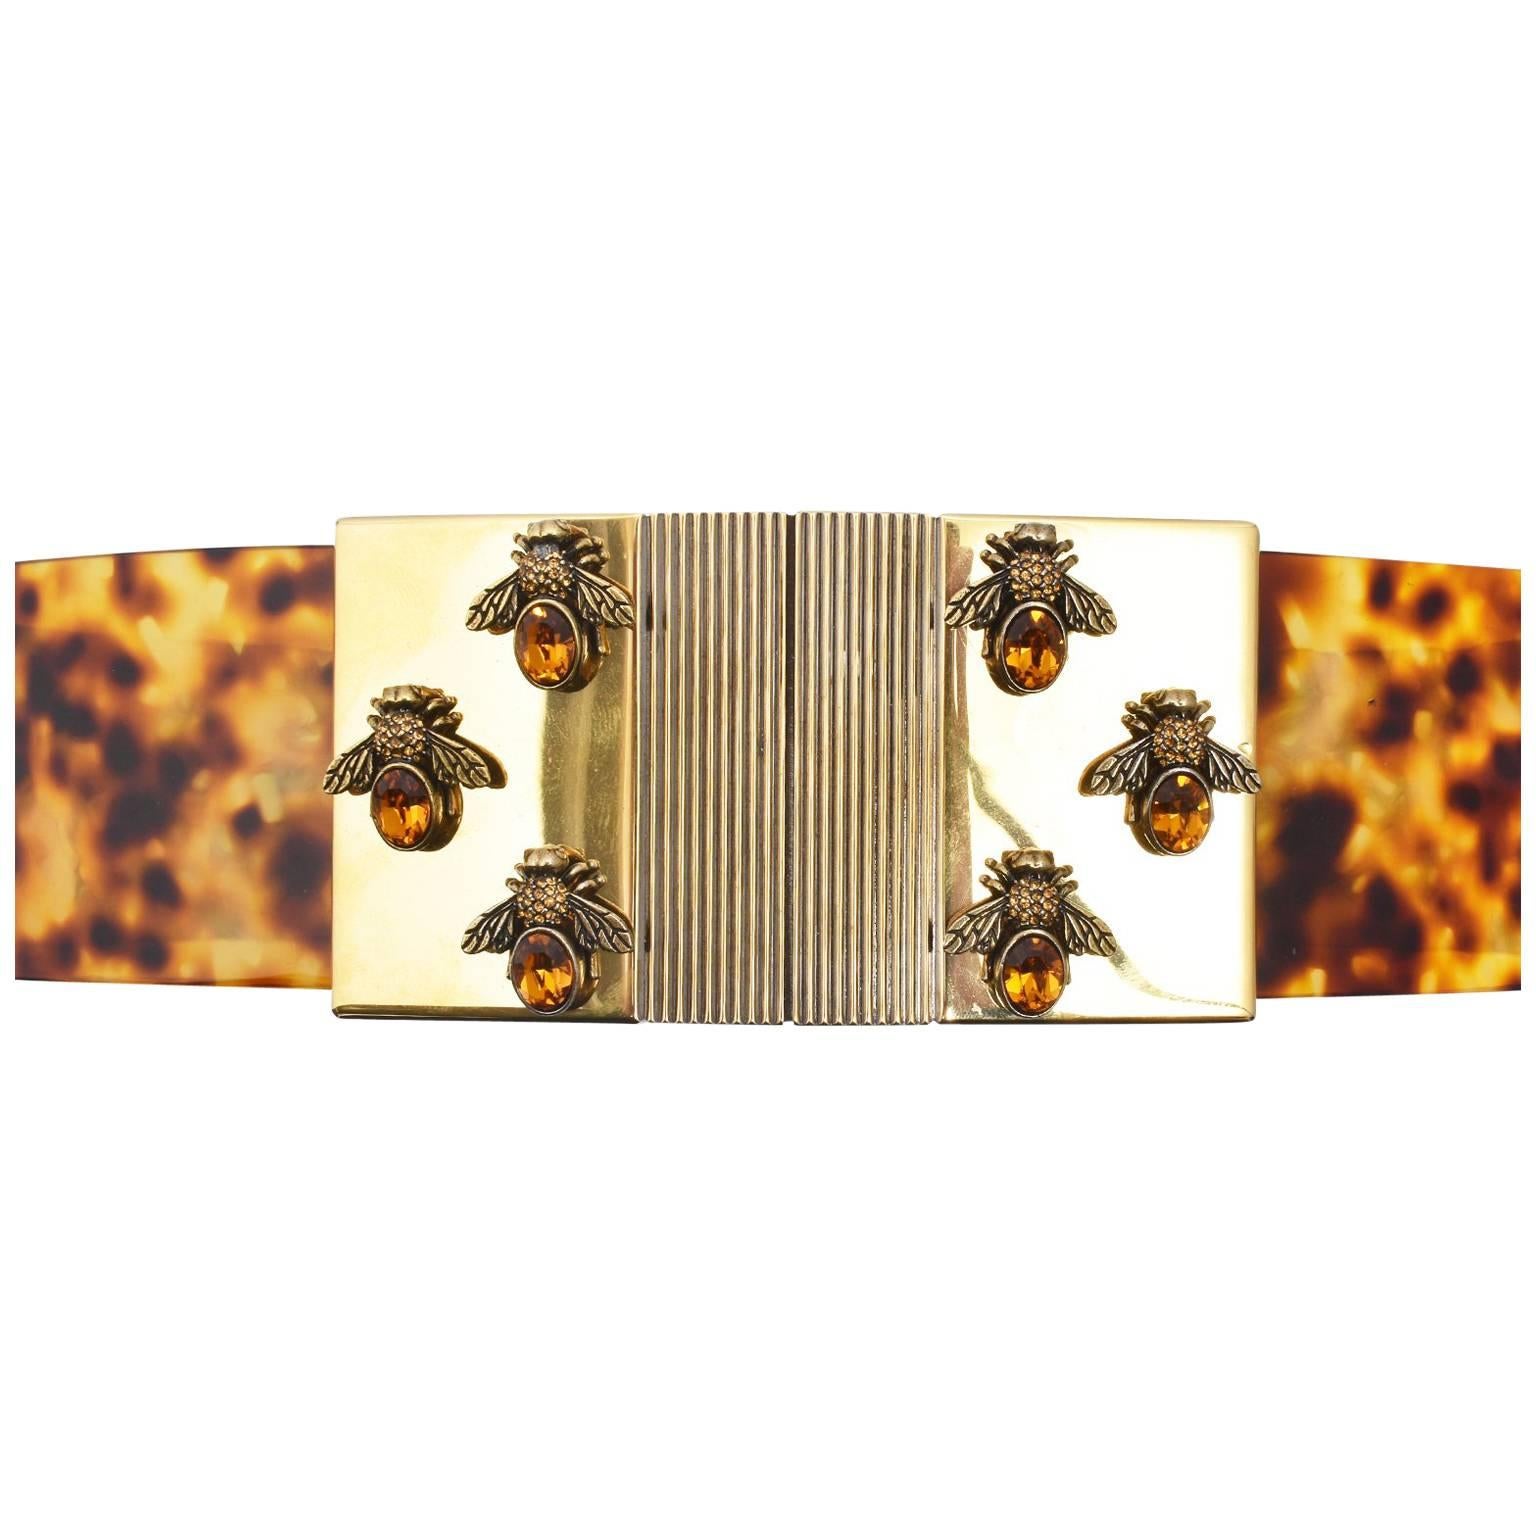 Alexander McQueen Tortoiseshell Perspex Belt with Gold Clasp and Bees S/S13 For Sale